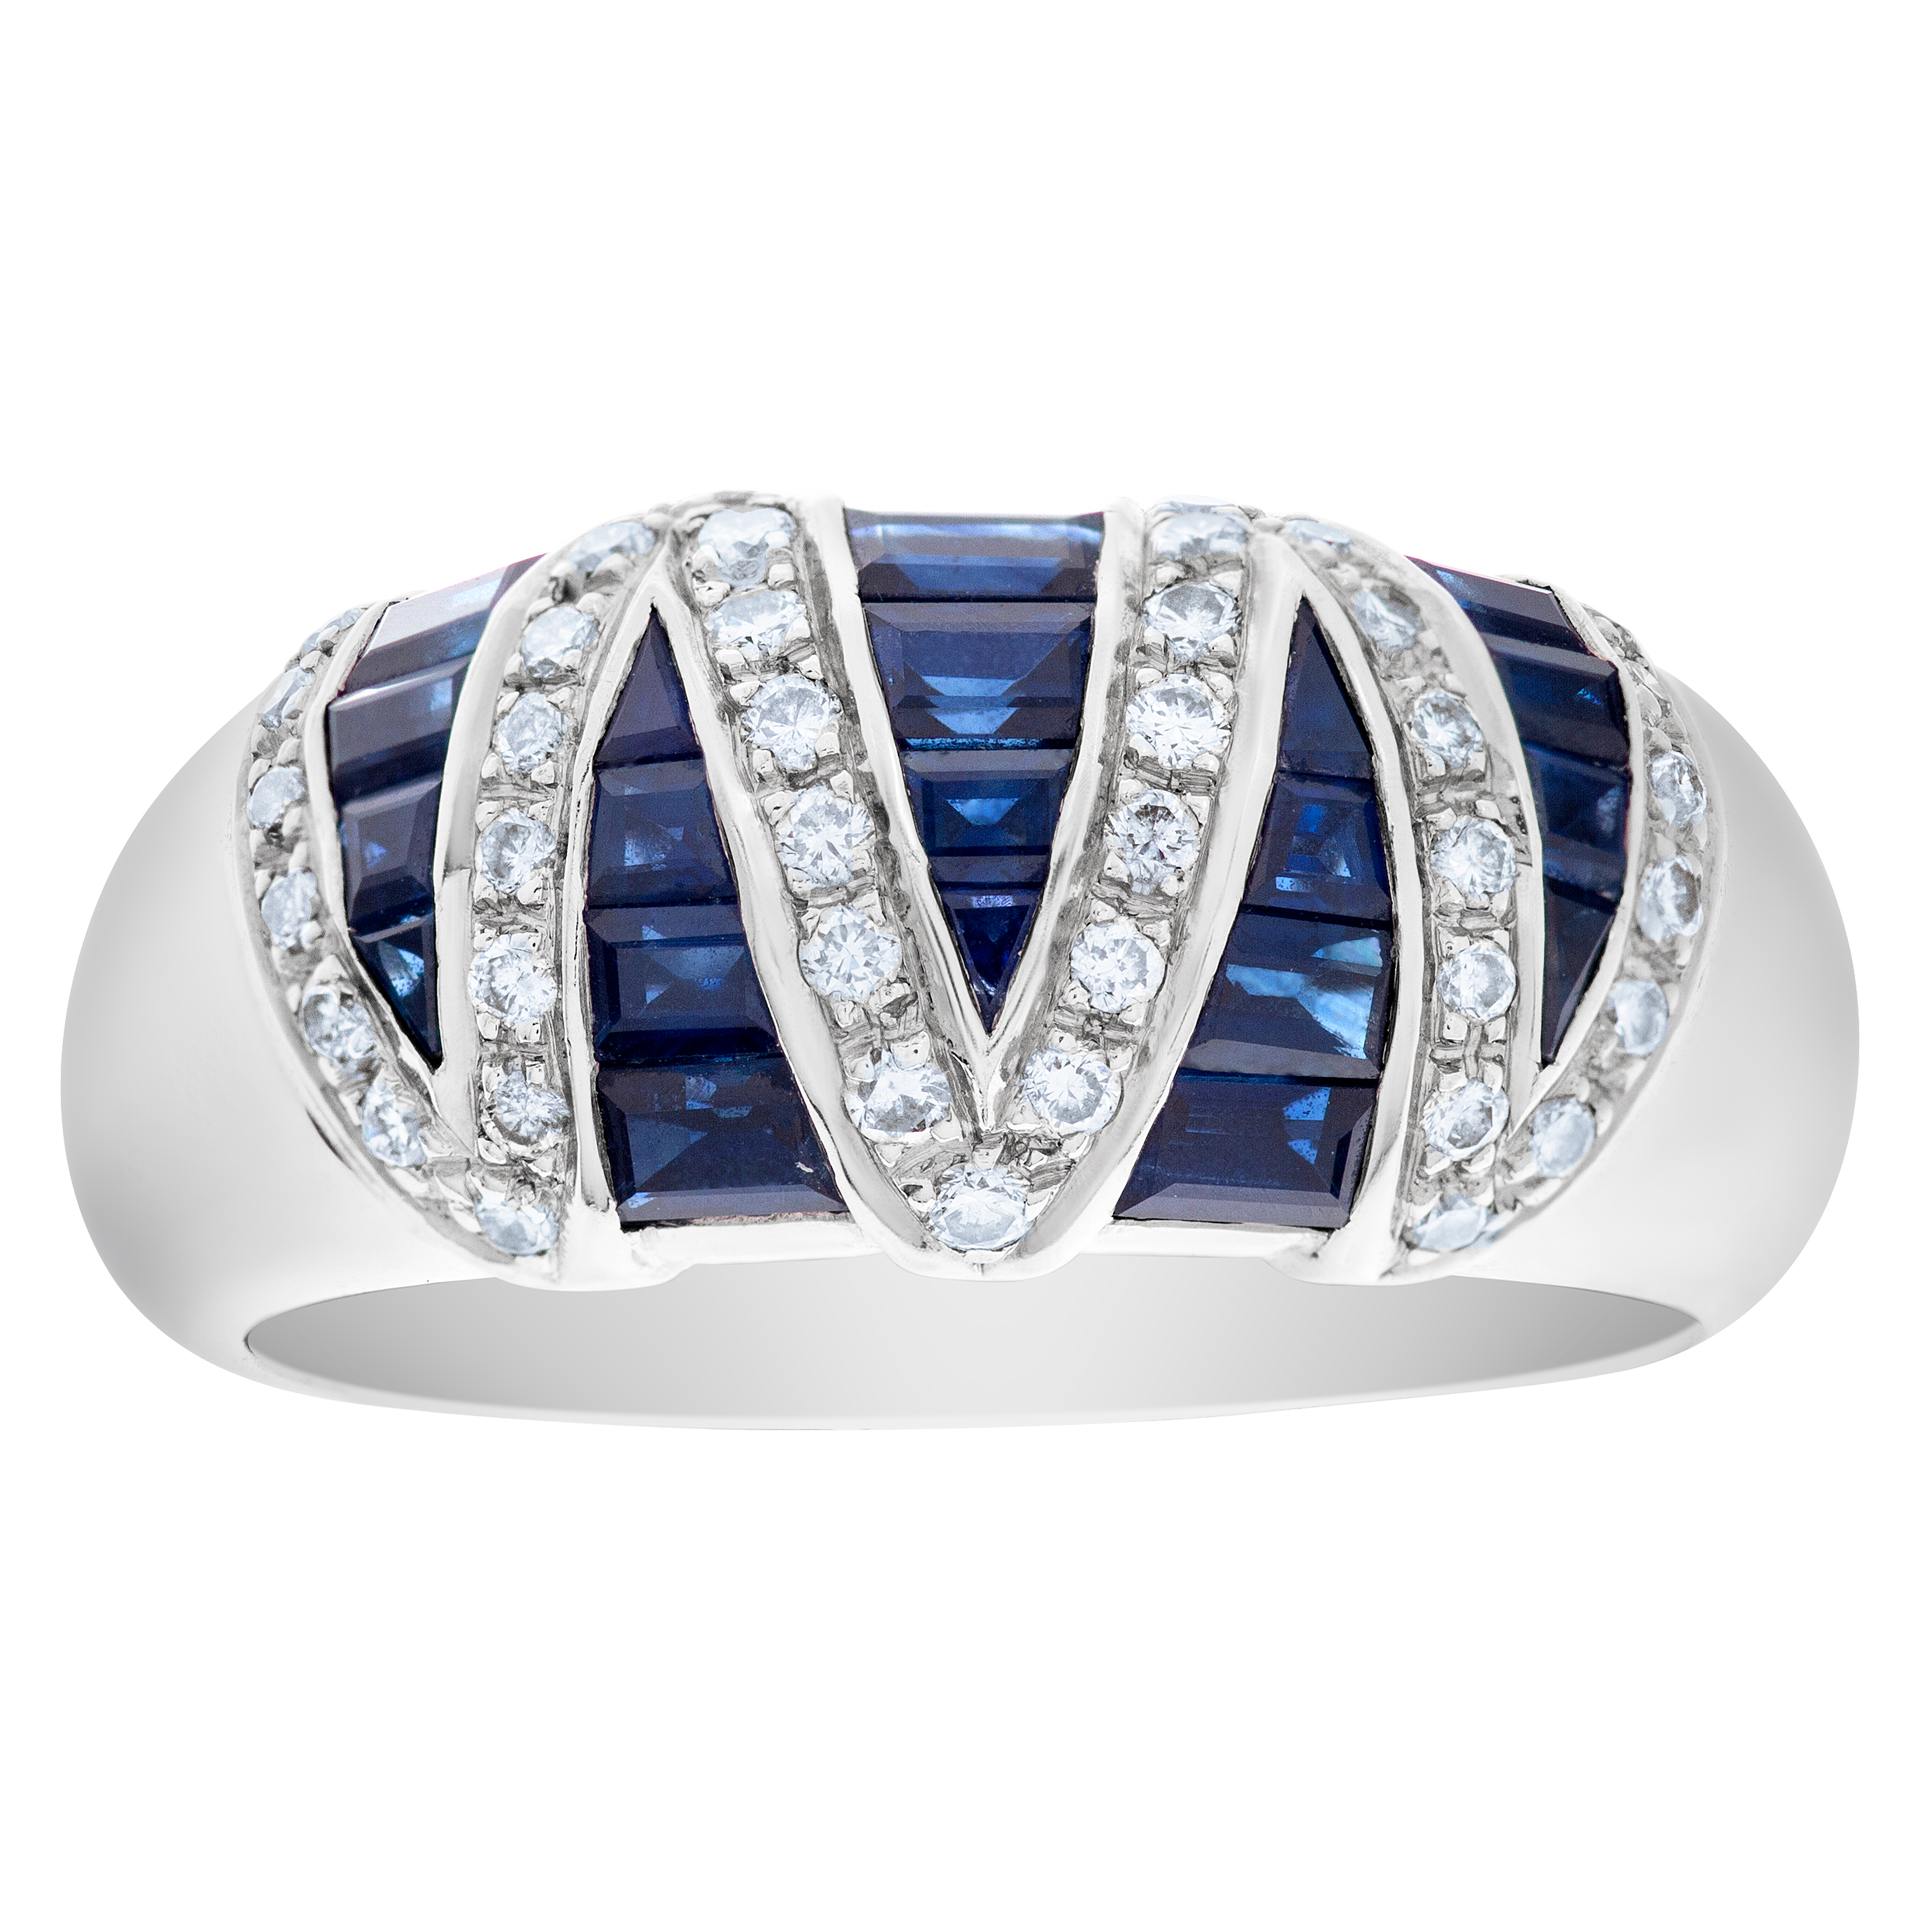 Sapphire and diamond ring in 18k white gold